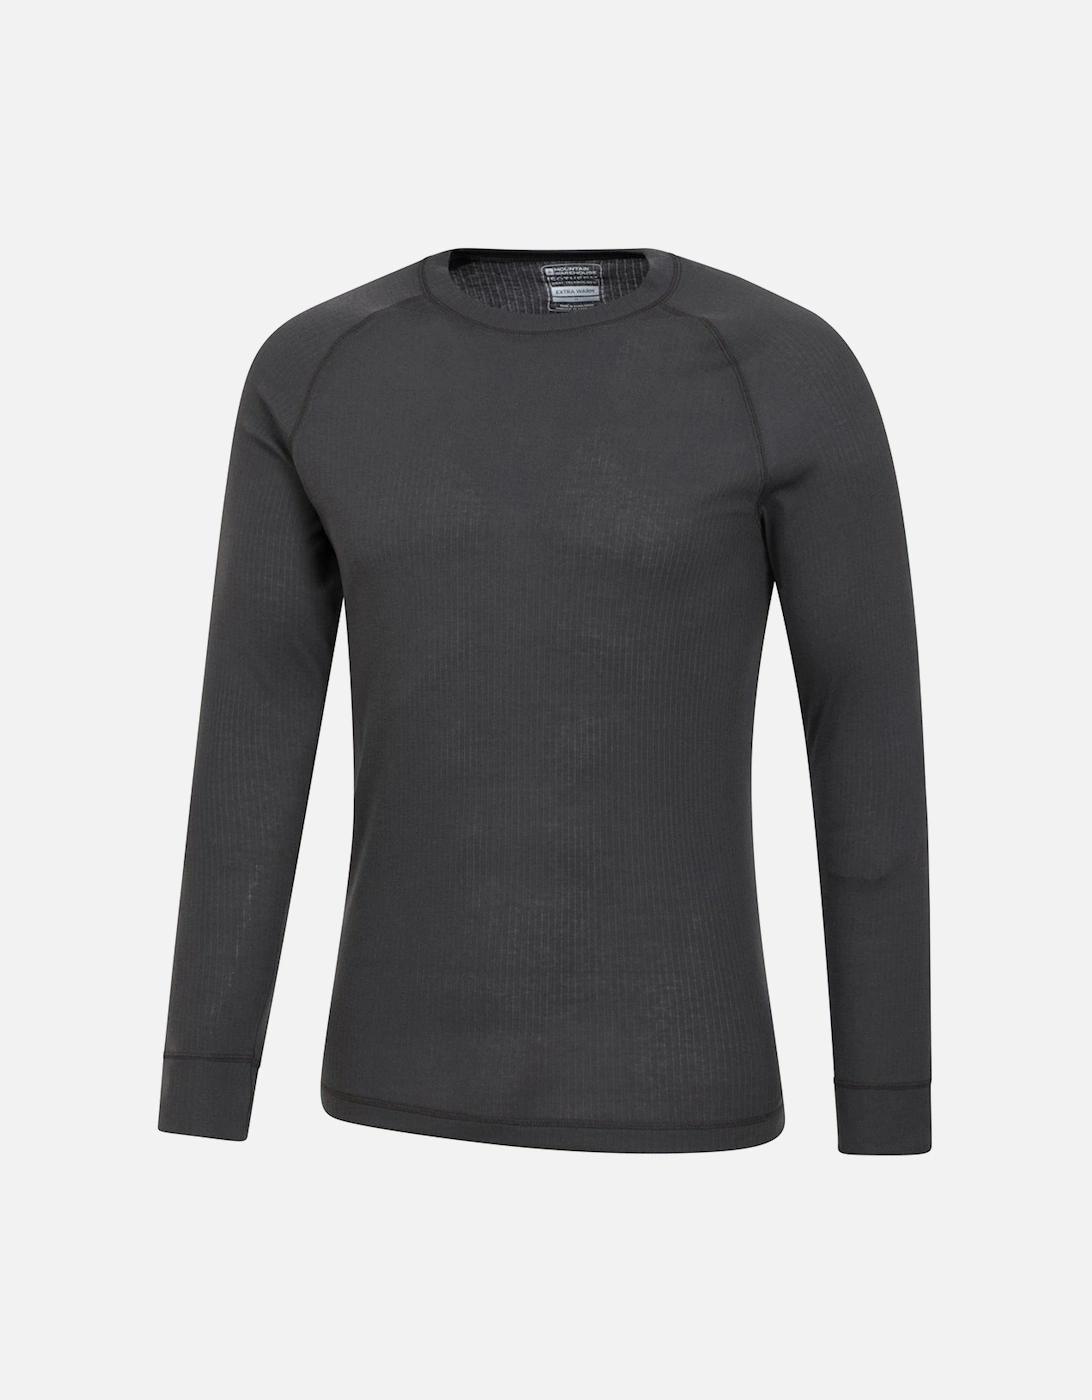 Mens Talus Round Neck Long-Sleeved Thermal Top